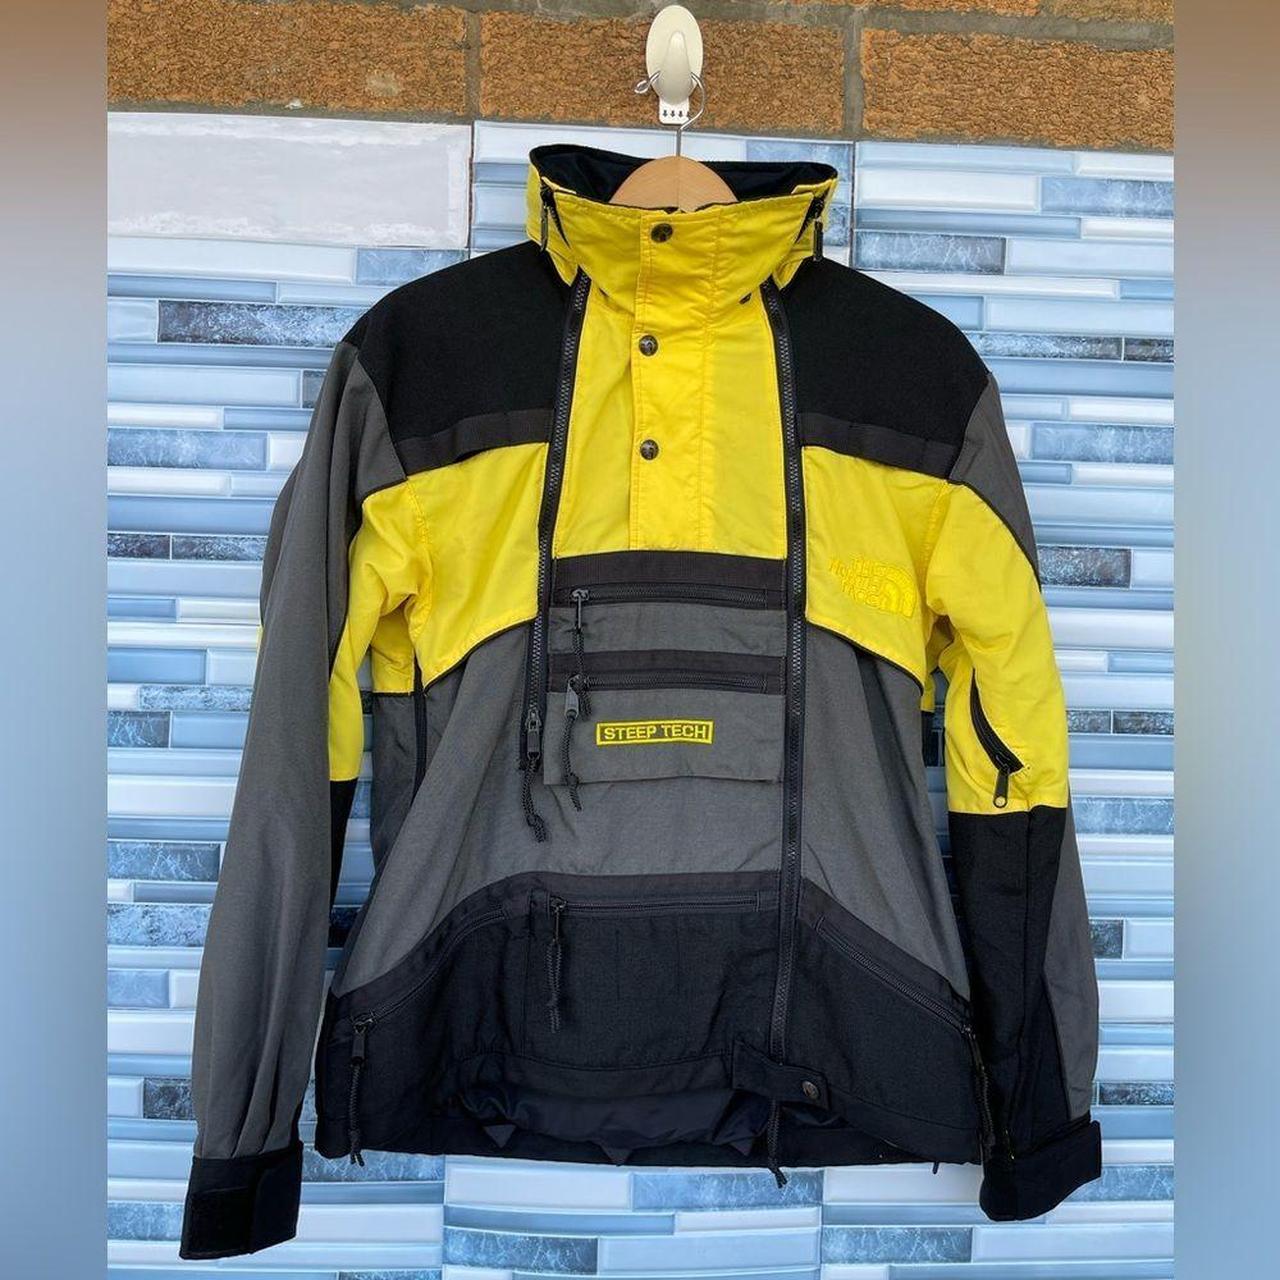 The North Face Jacket Yellow Vintage 90s Steep Tech - Depop